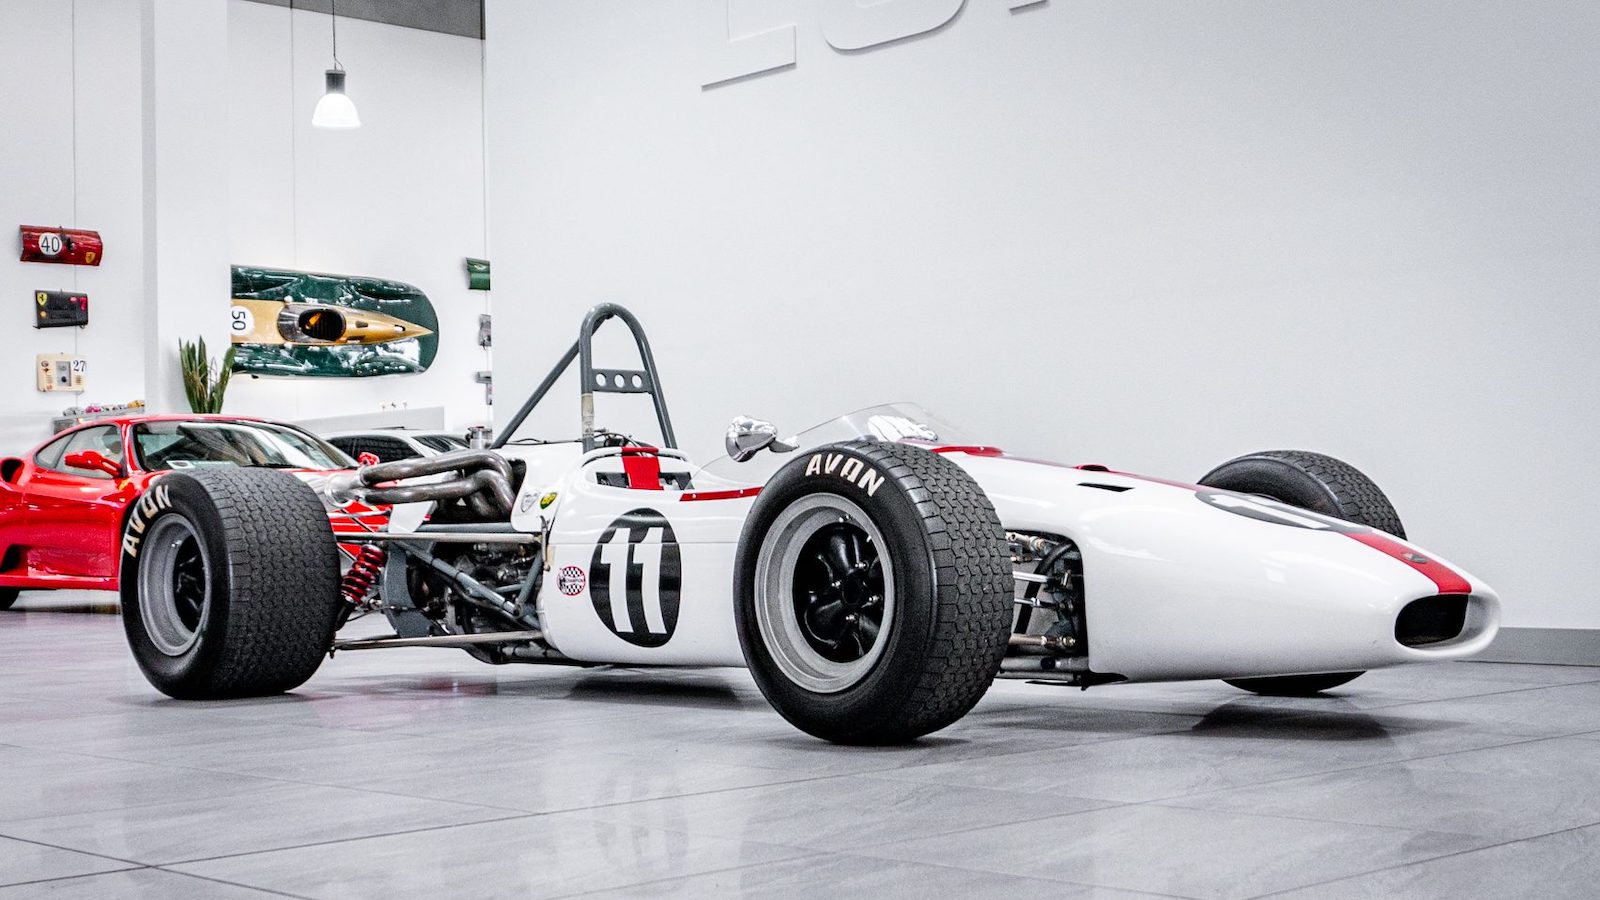 This $500,000 Race Car Is A Piece Of Australian Motoring History – And It’s For Sale